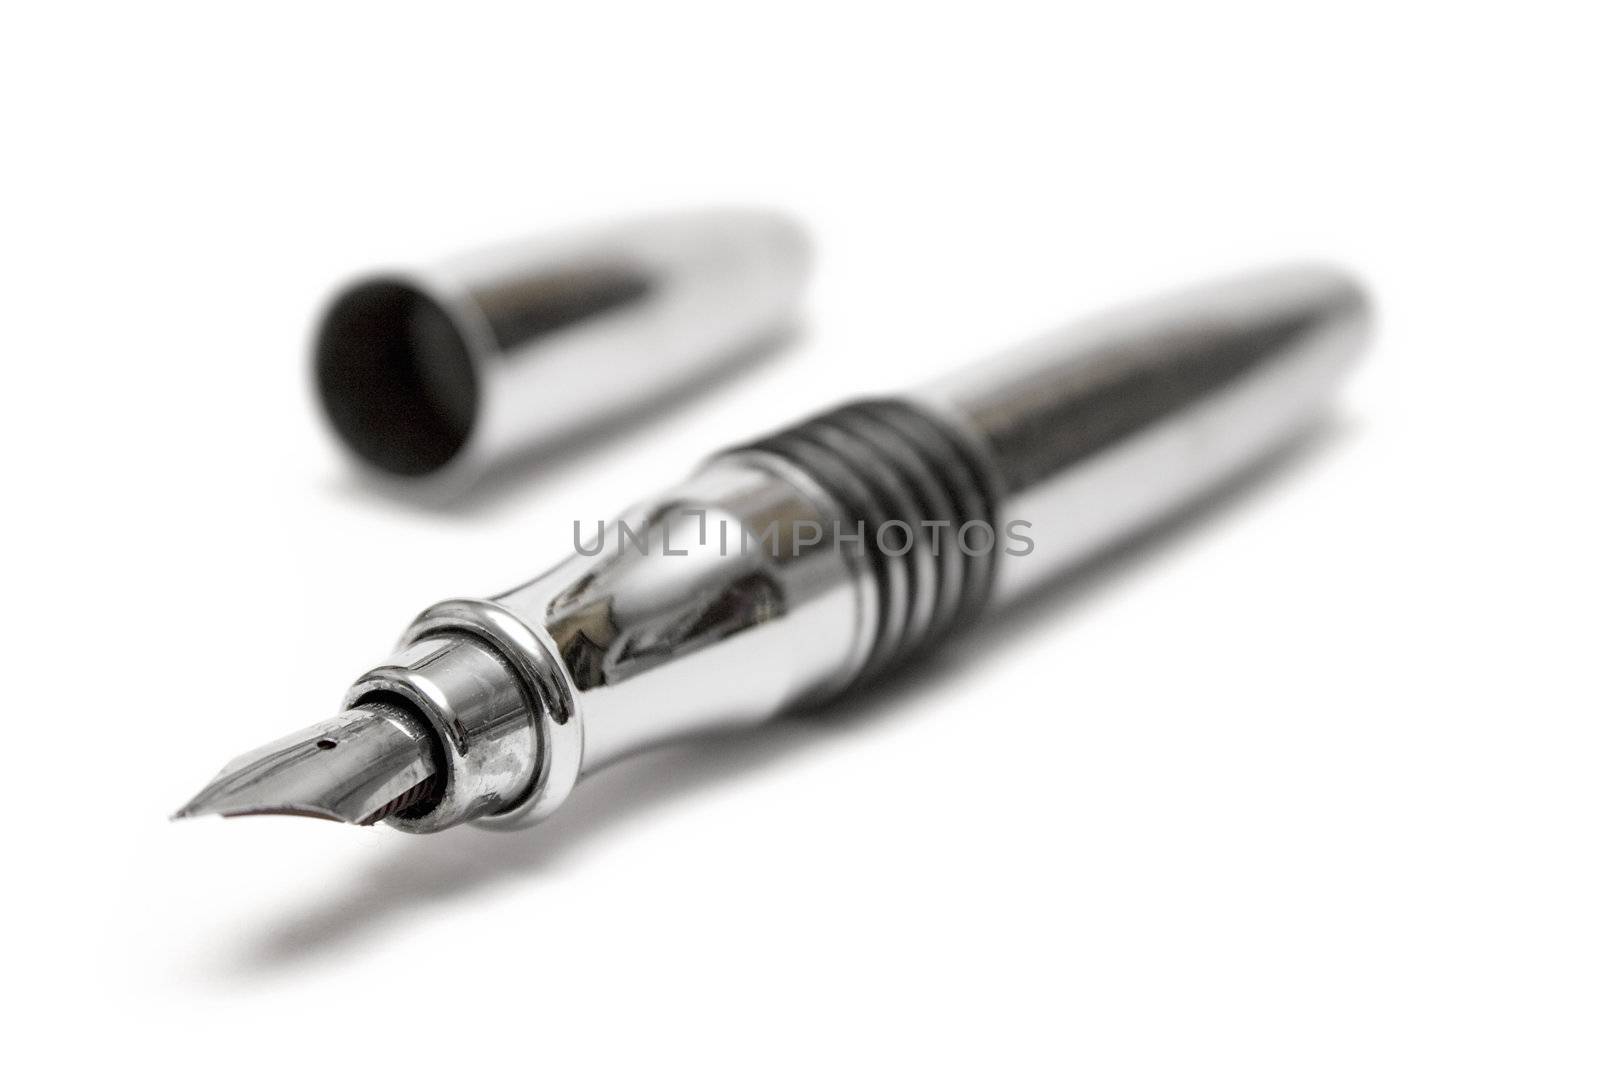 Silver fountain writing pen isolated on a white background.